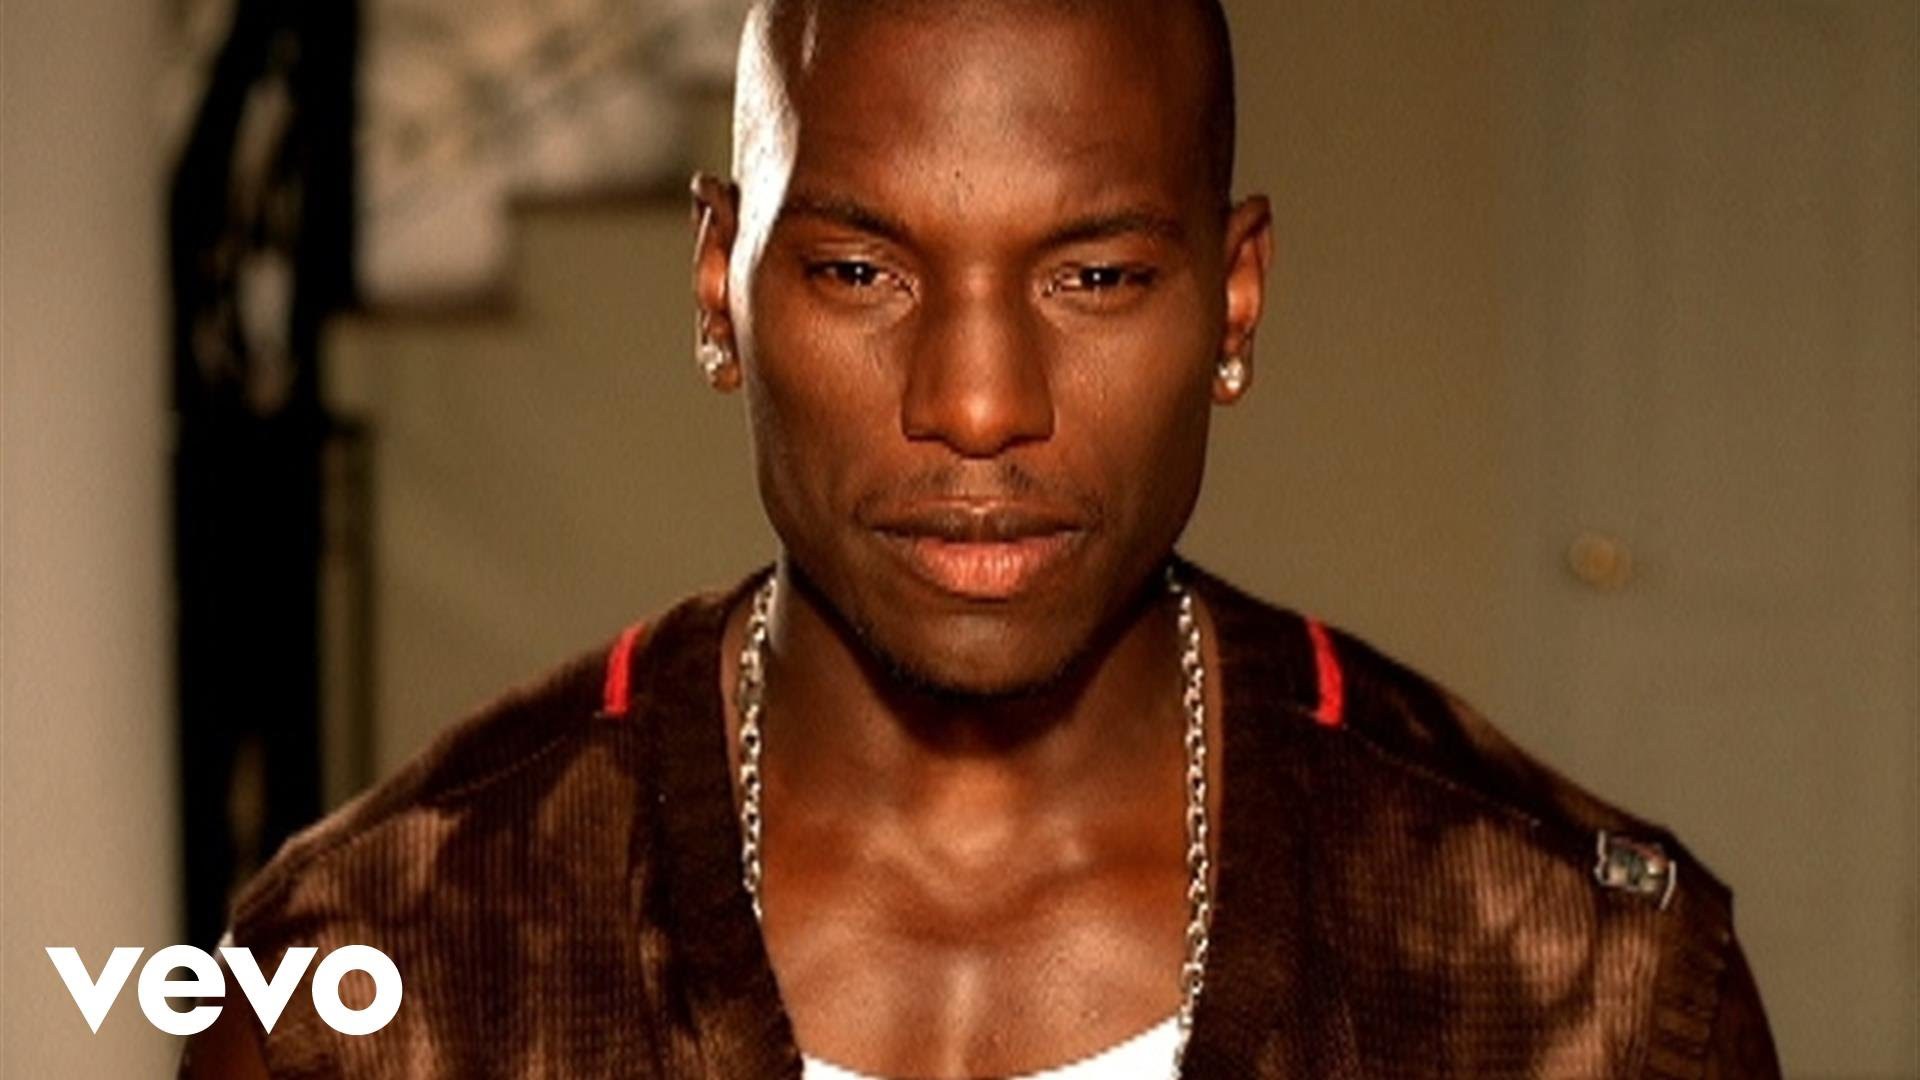 Tyrese Gibson Wallpaper Image Photos Pictures Background